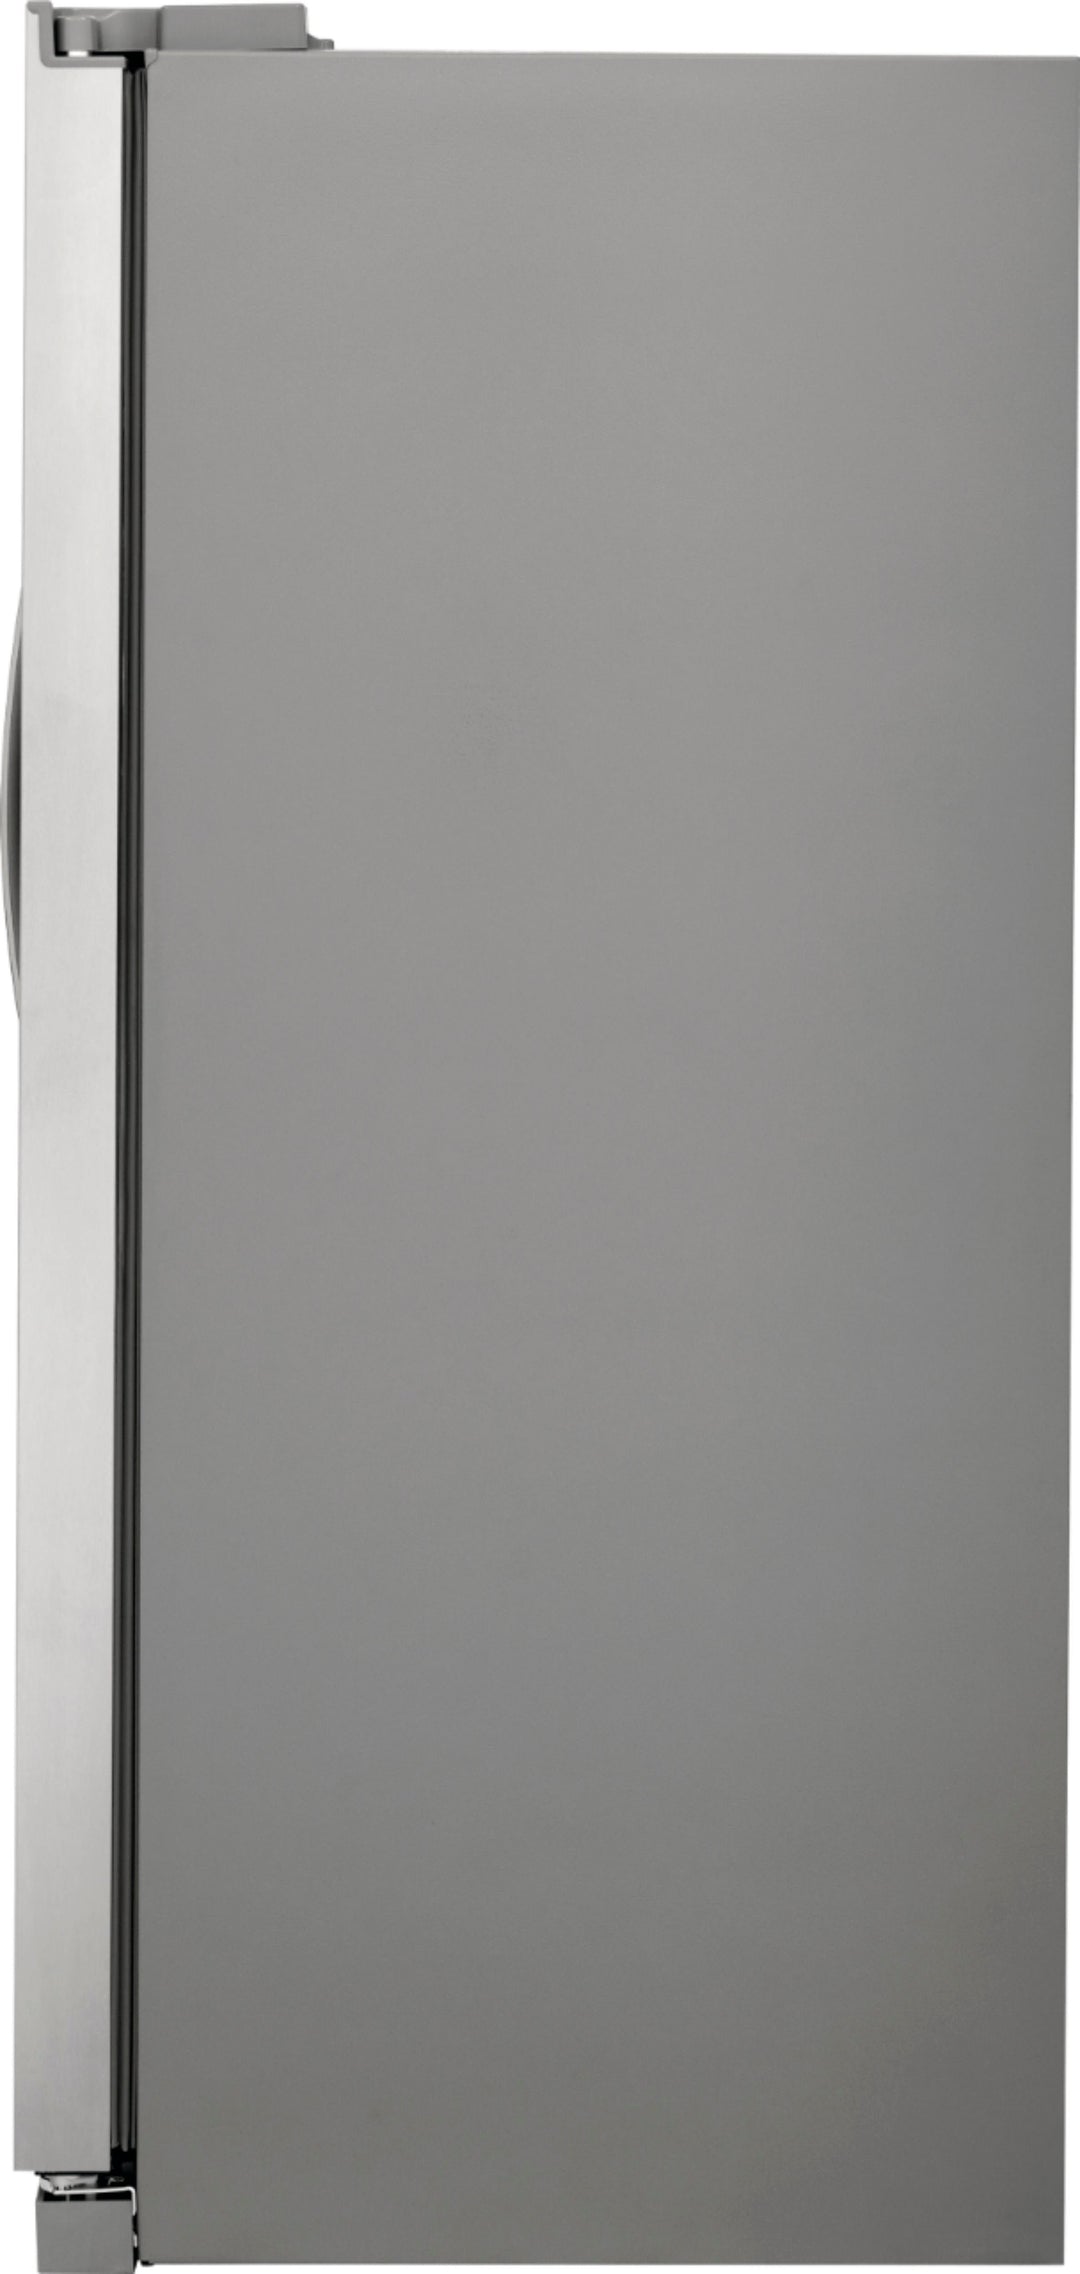 Frigidaire - 22.3 Cu. Ft. Side-by-Side Refrigerator - Stainless steel_2